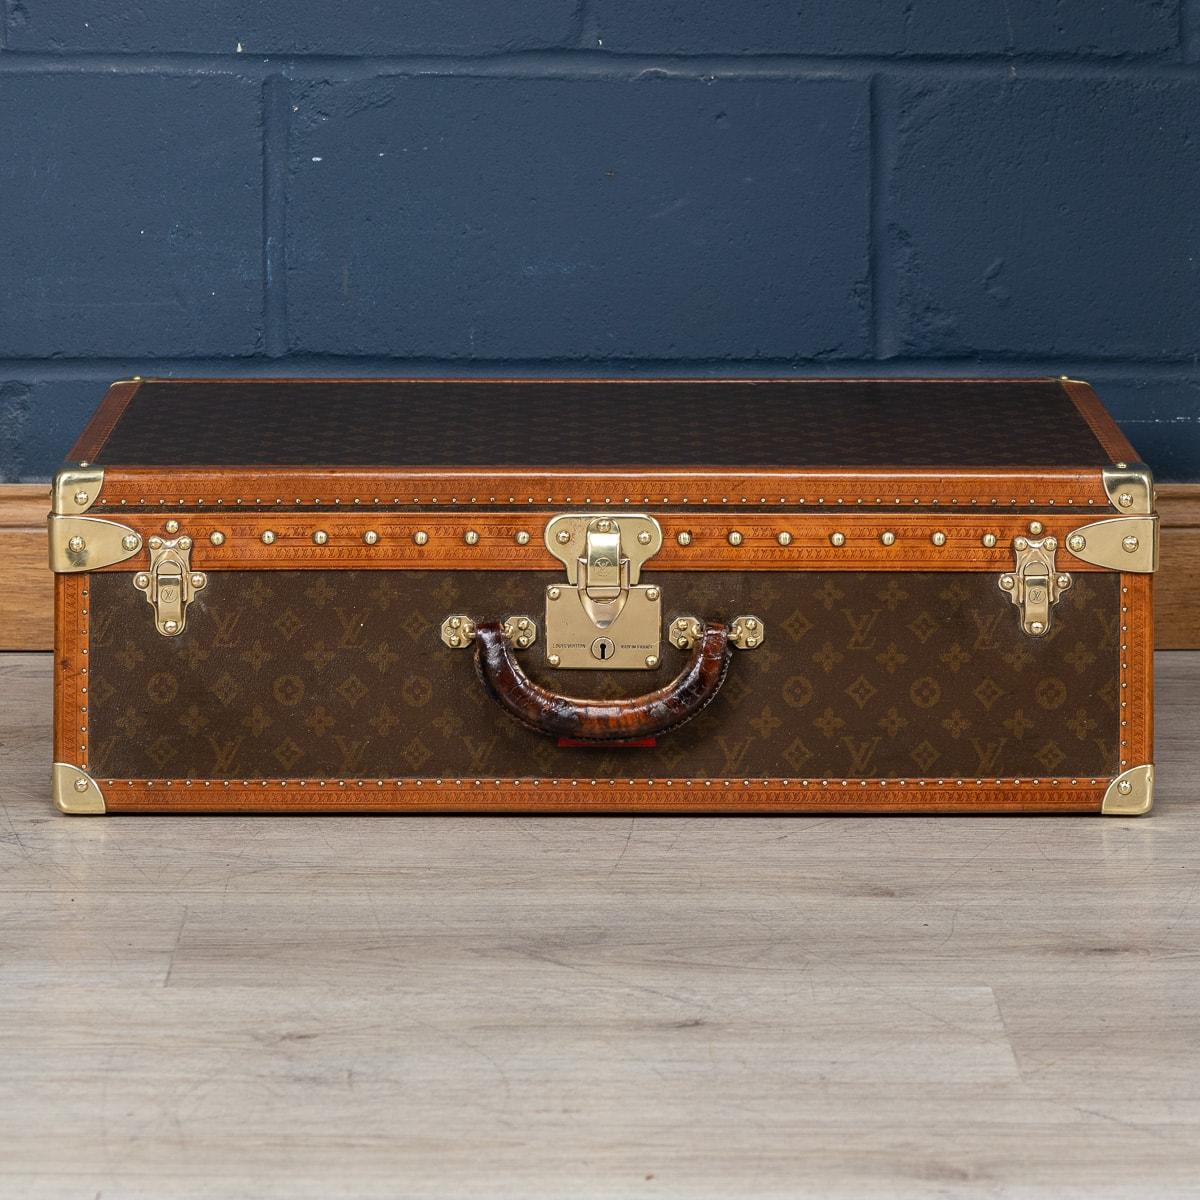 A highly unusual and exceptionally rare Louis Vuitton suitcase, originating from the early years of the 20th century, distinguishes itself not with the globally renowned monogram canvas but with a distinctive covering crafted from a singular piece